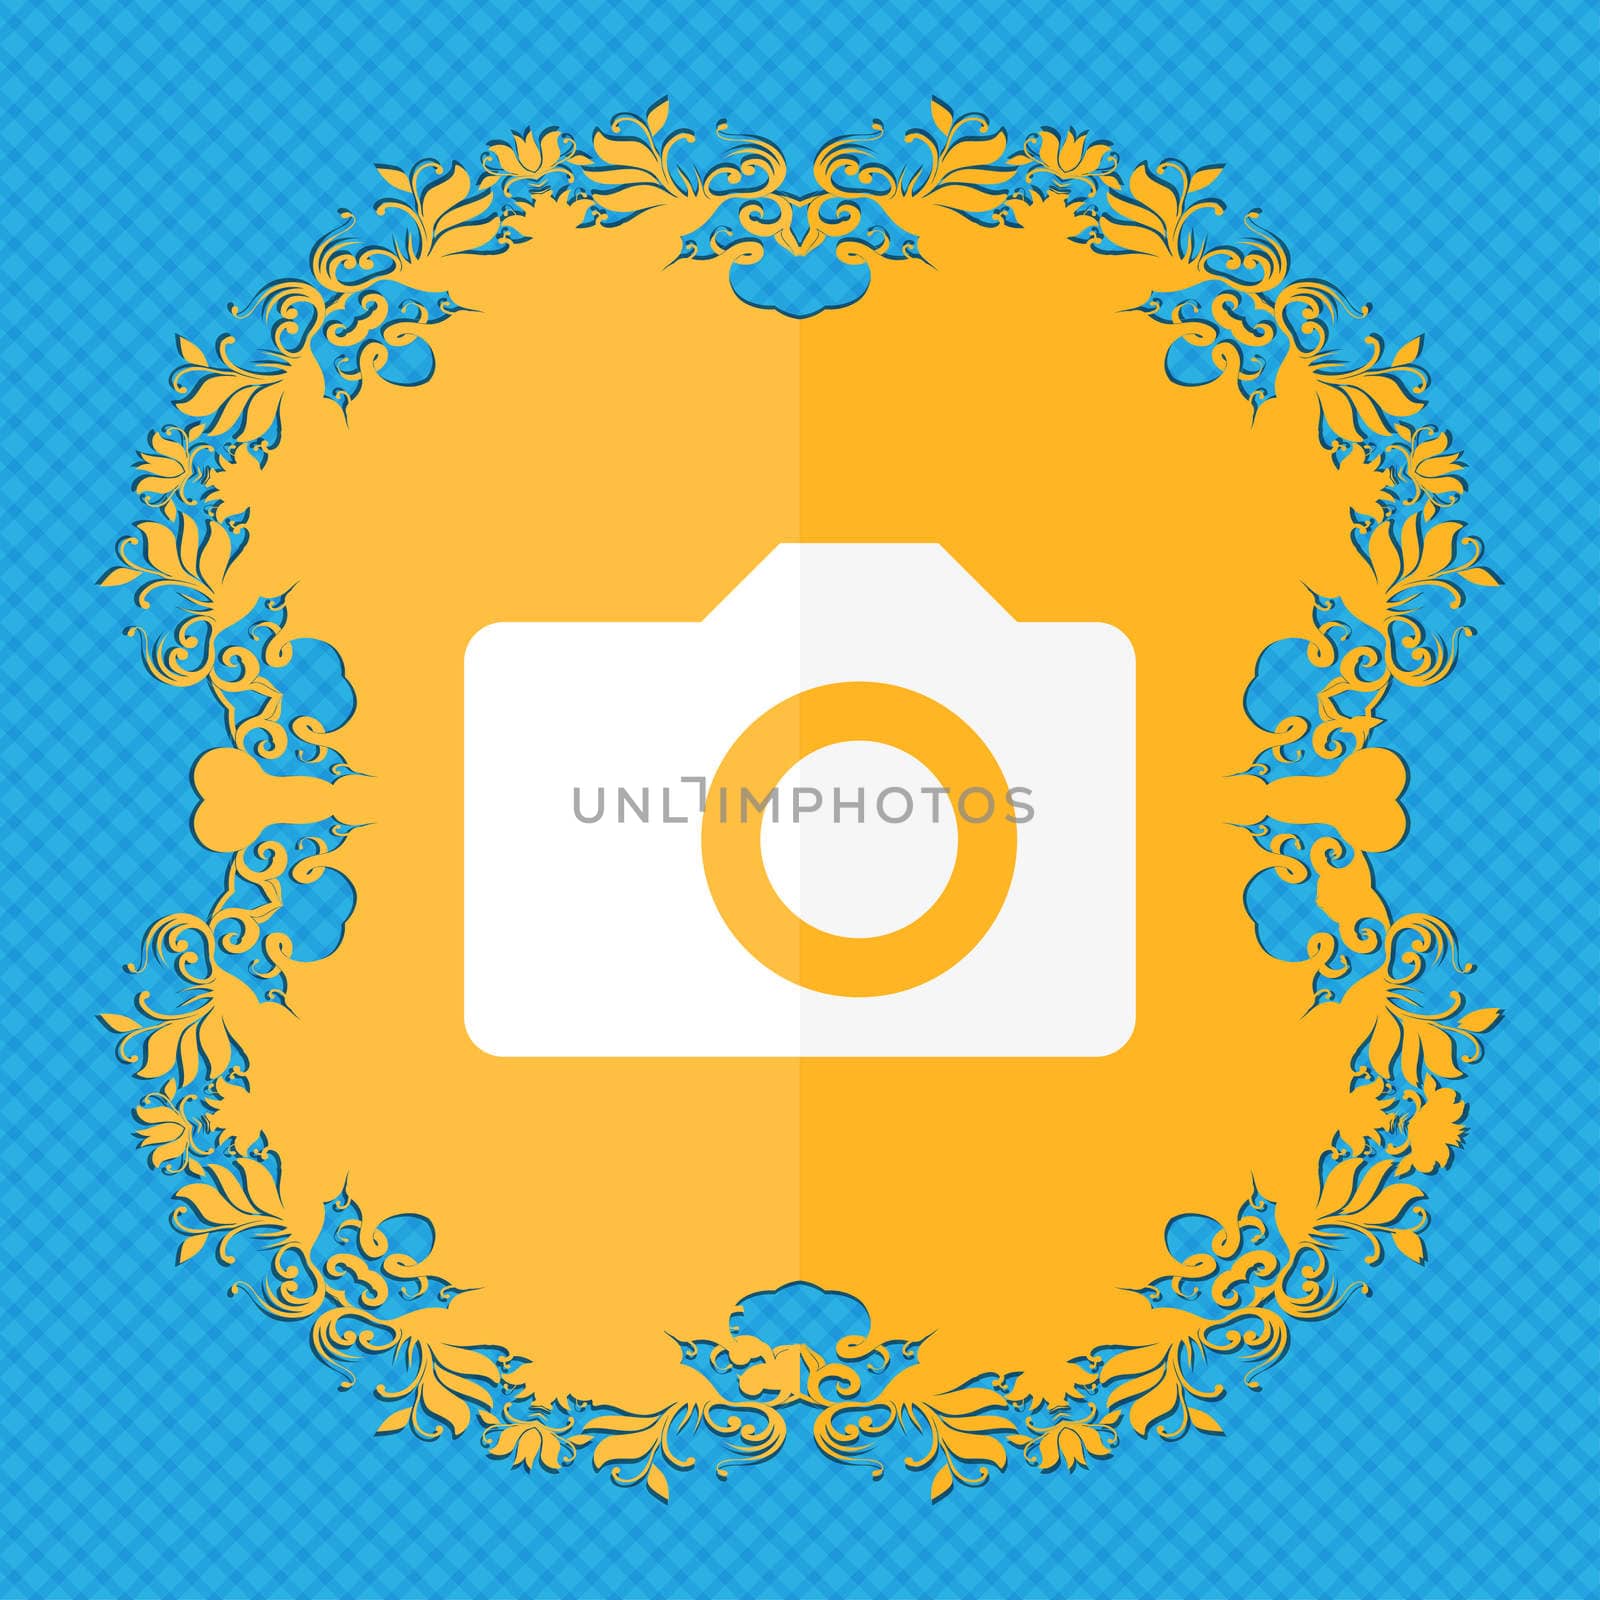 Digital photo camera . Floral flat design on a blue abstract background with place for your text. illustration